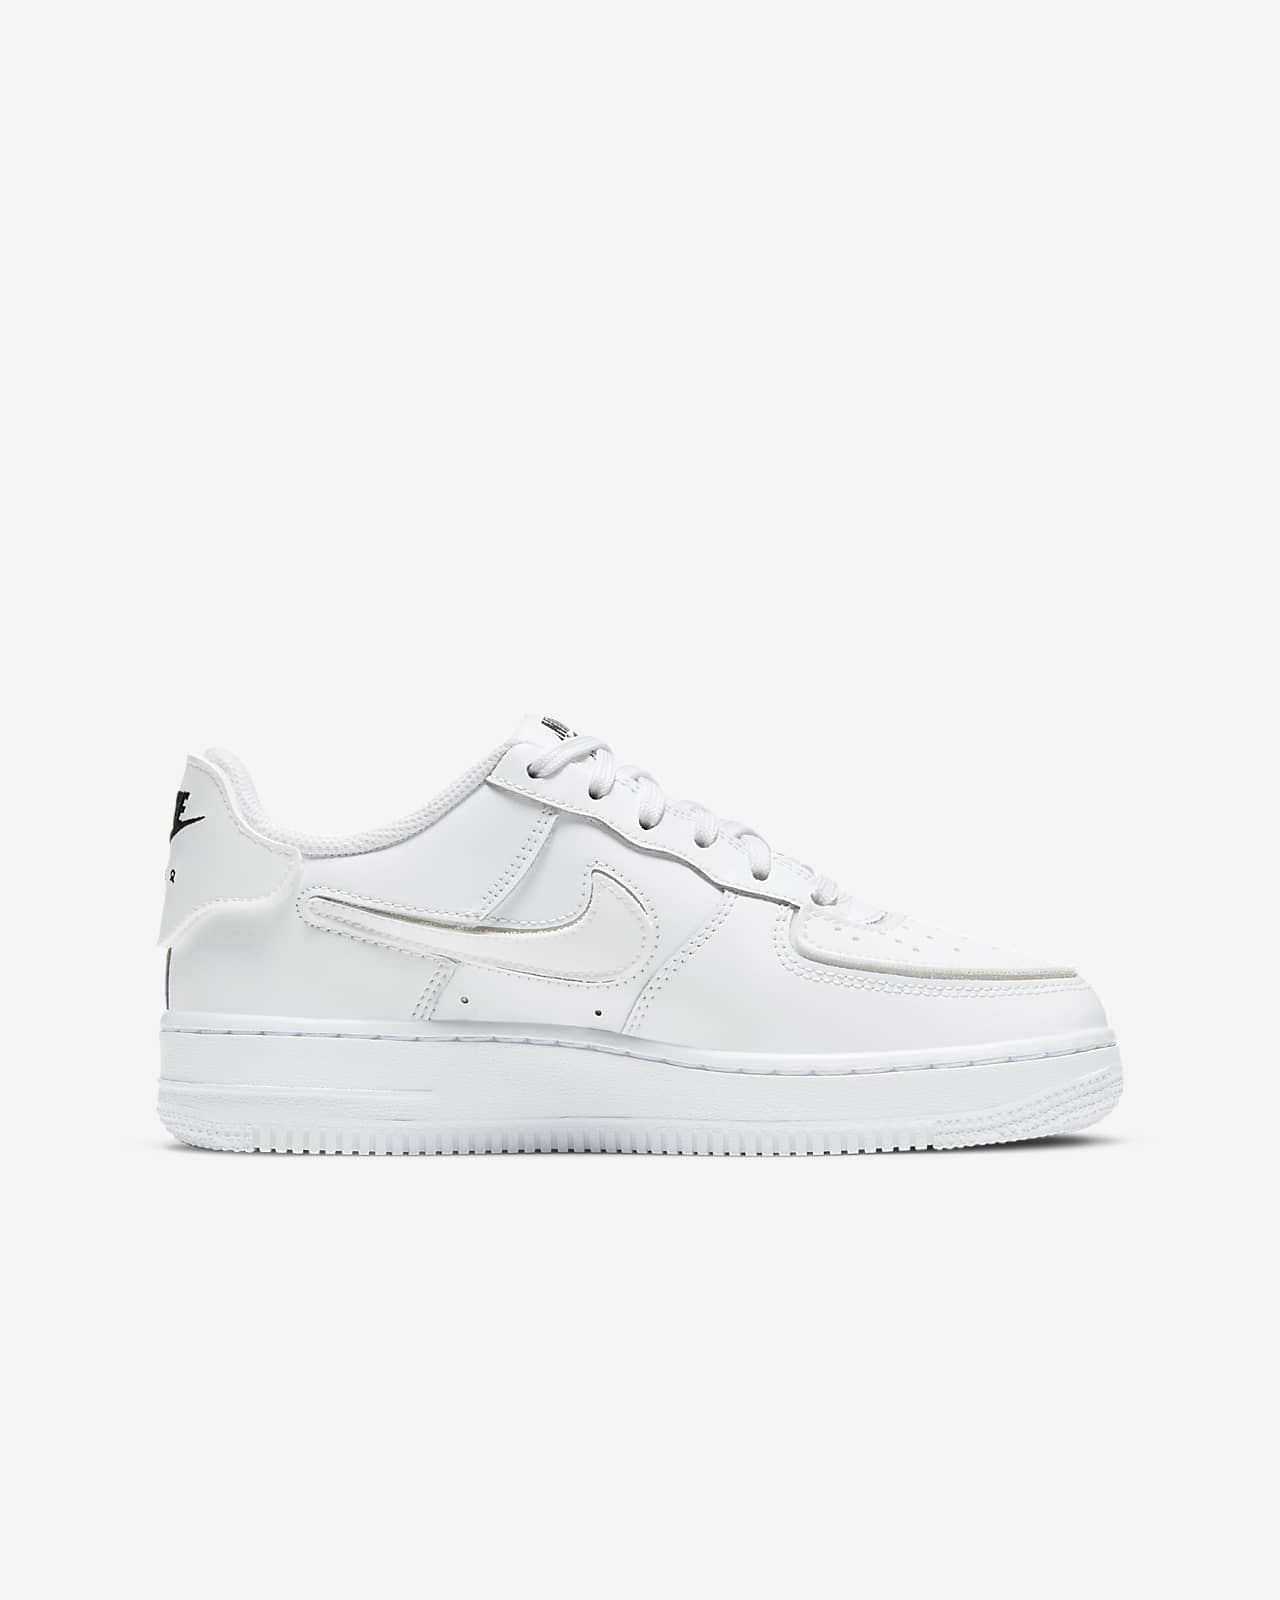 nike air force 1 youth size 4.5